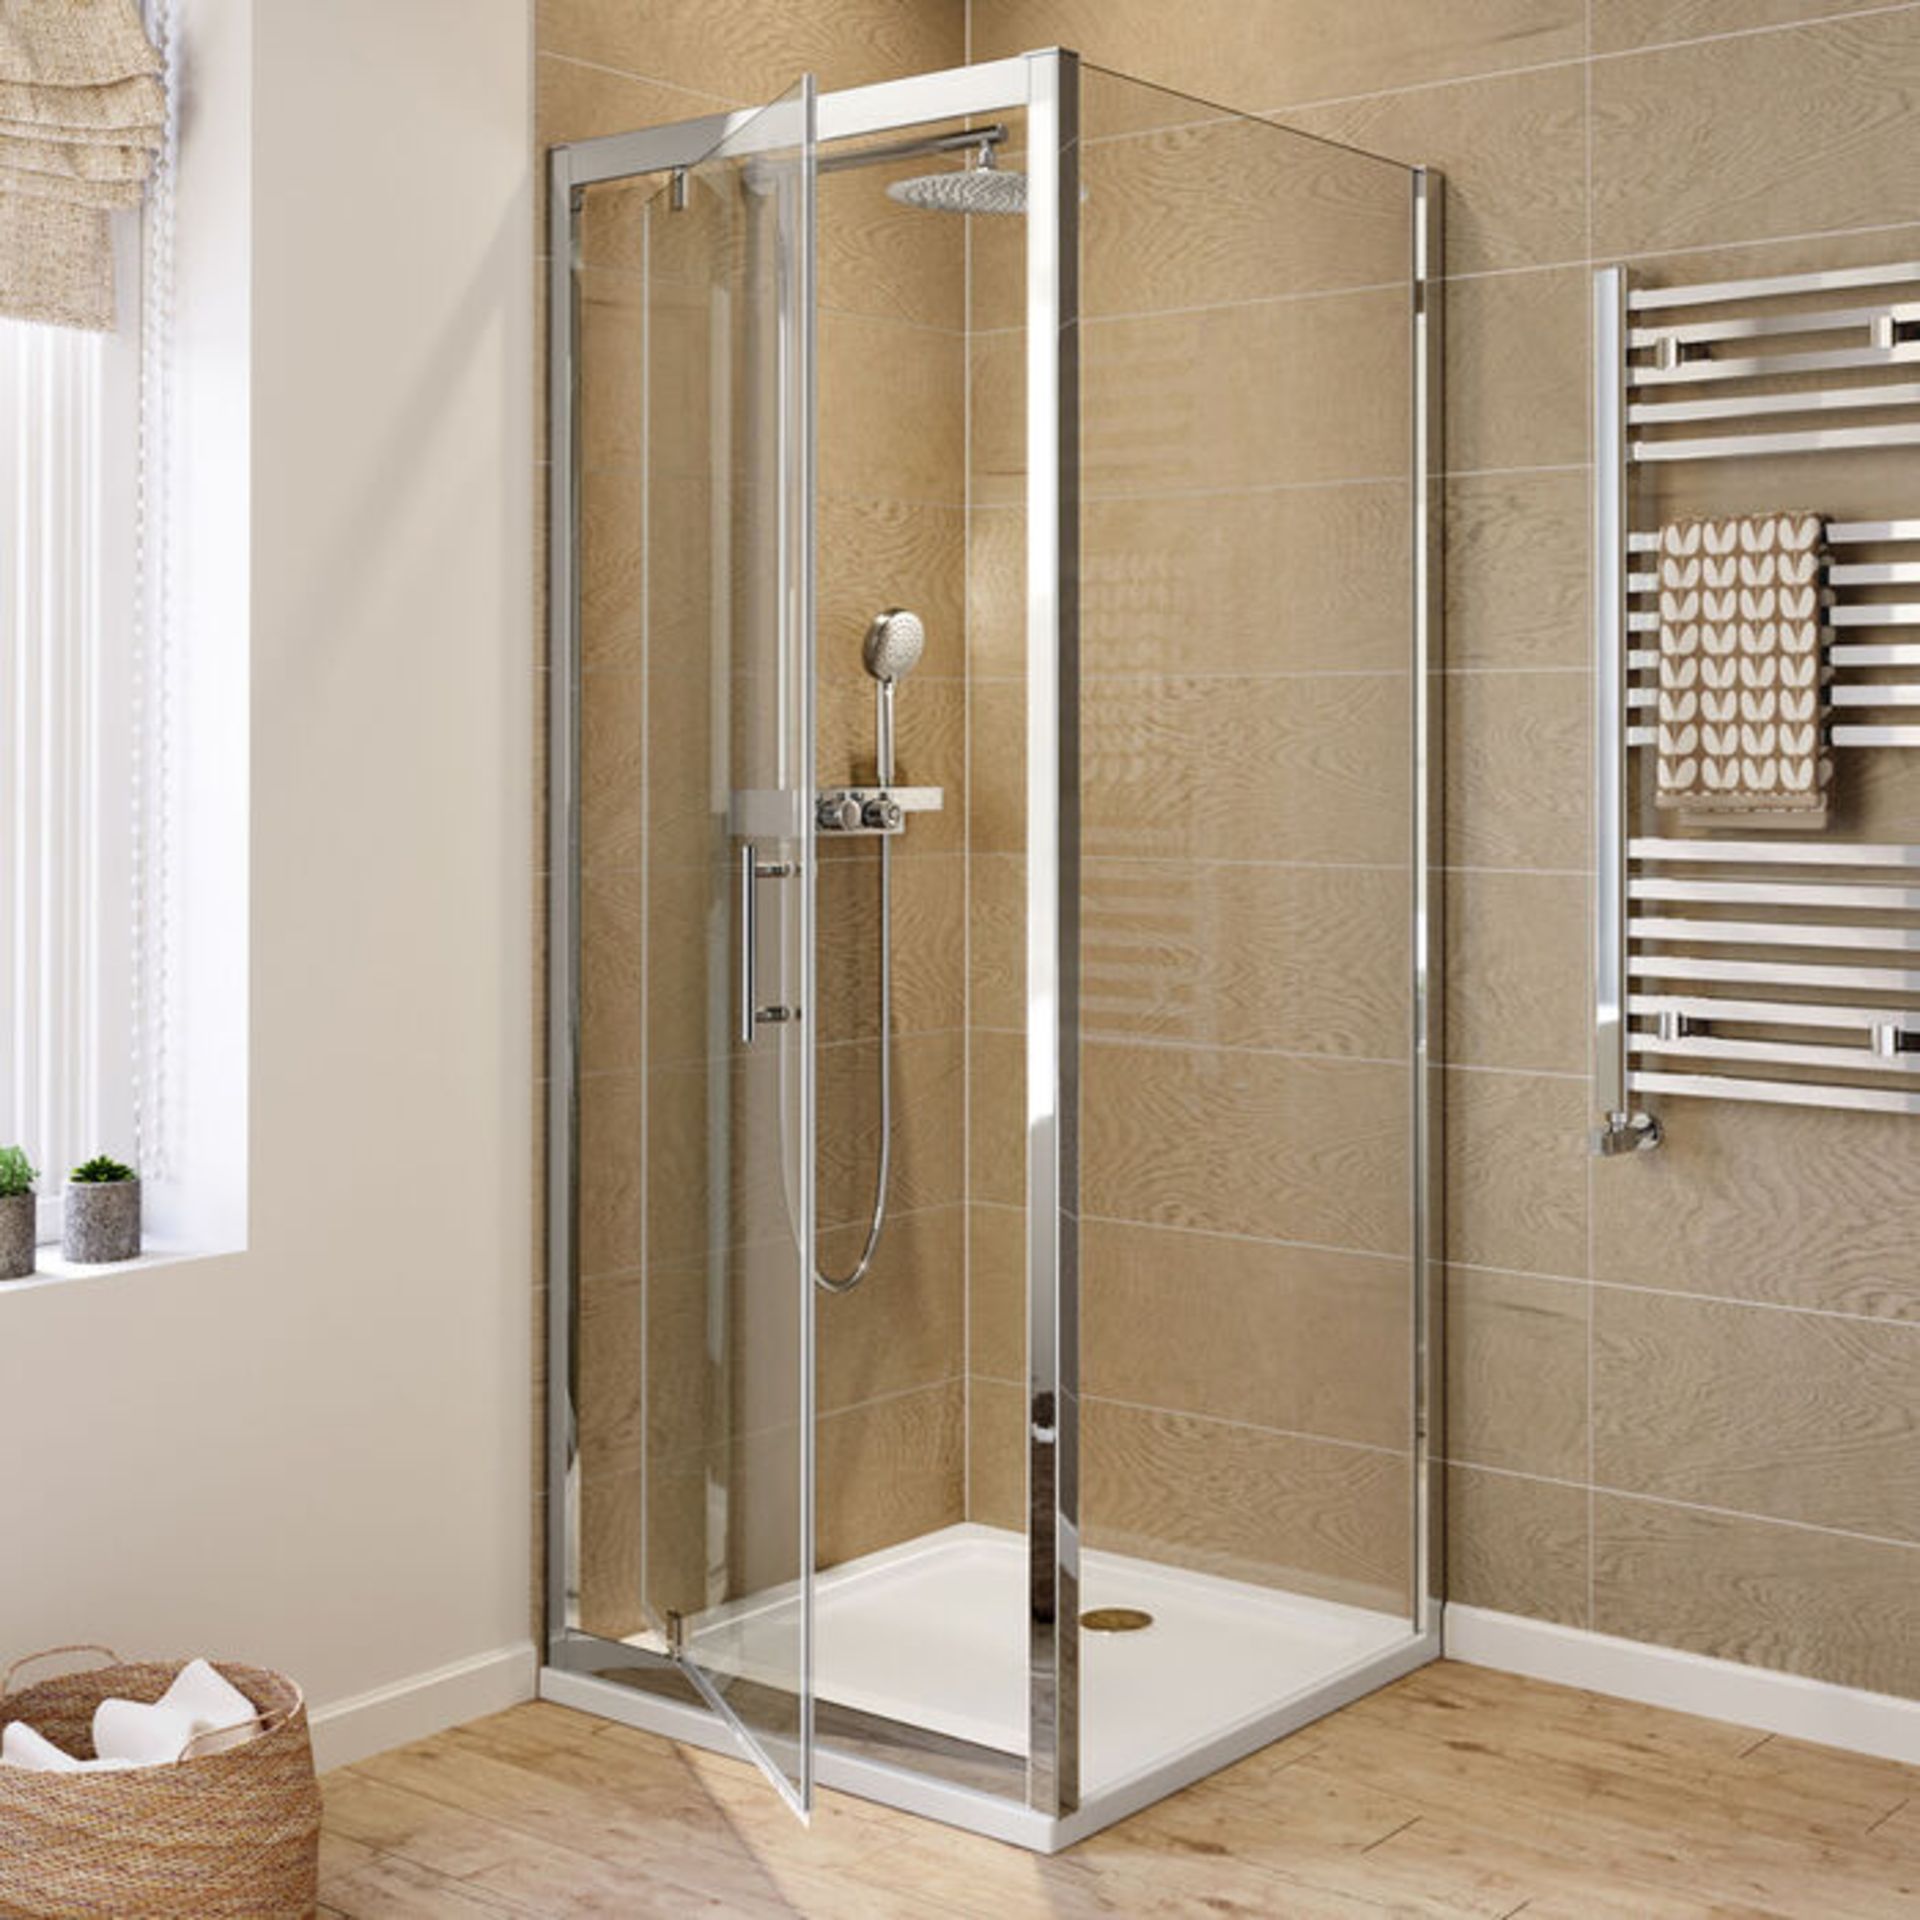 (QQ35) 800x800mm - 6mm - Elements Pivot Door Shower Enclosure. RRP £353.99. 6mm Safety Glass ... - Image 2 of 4